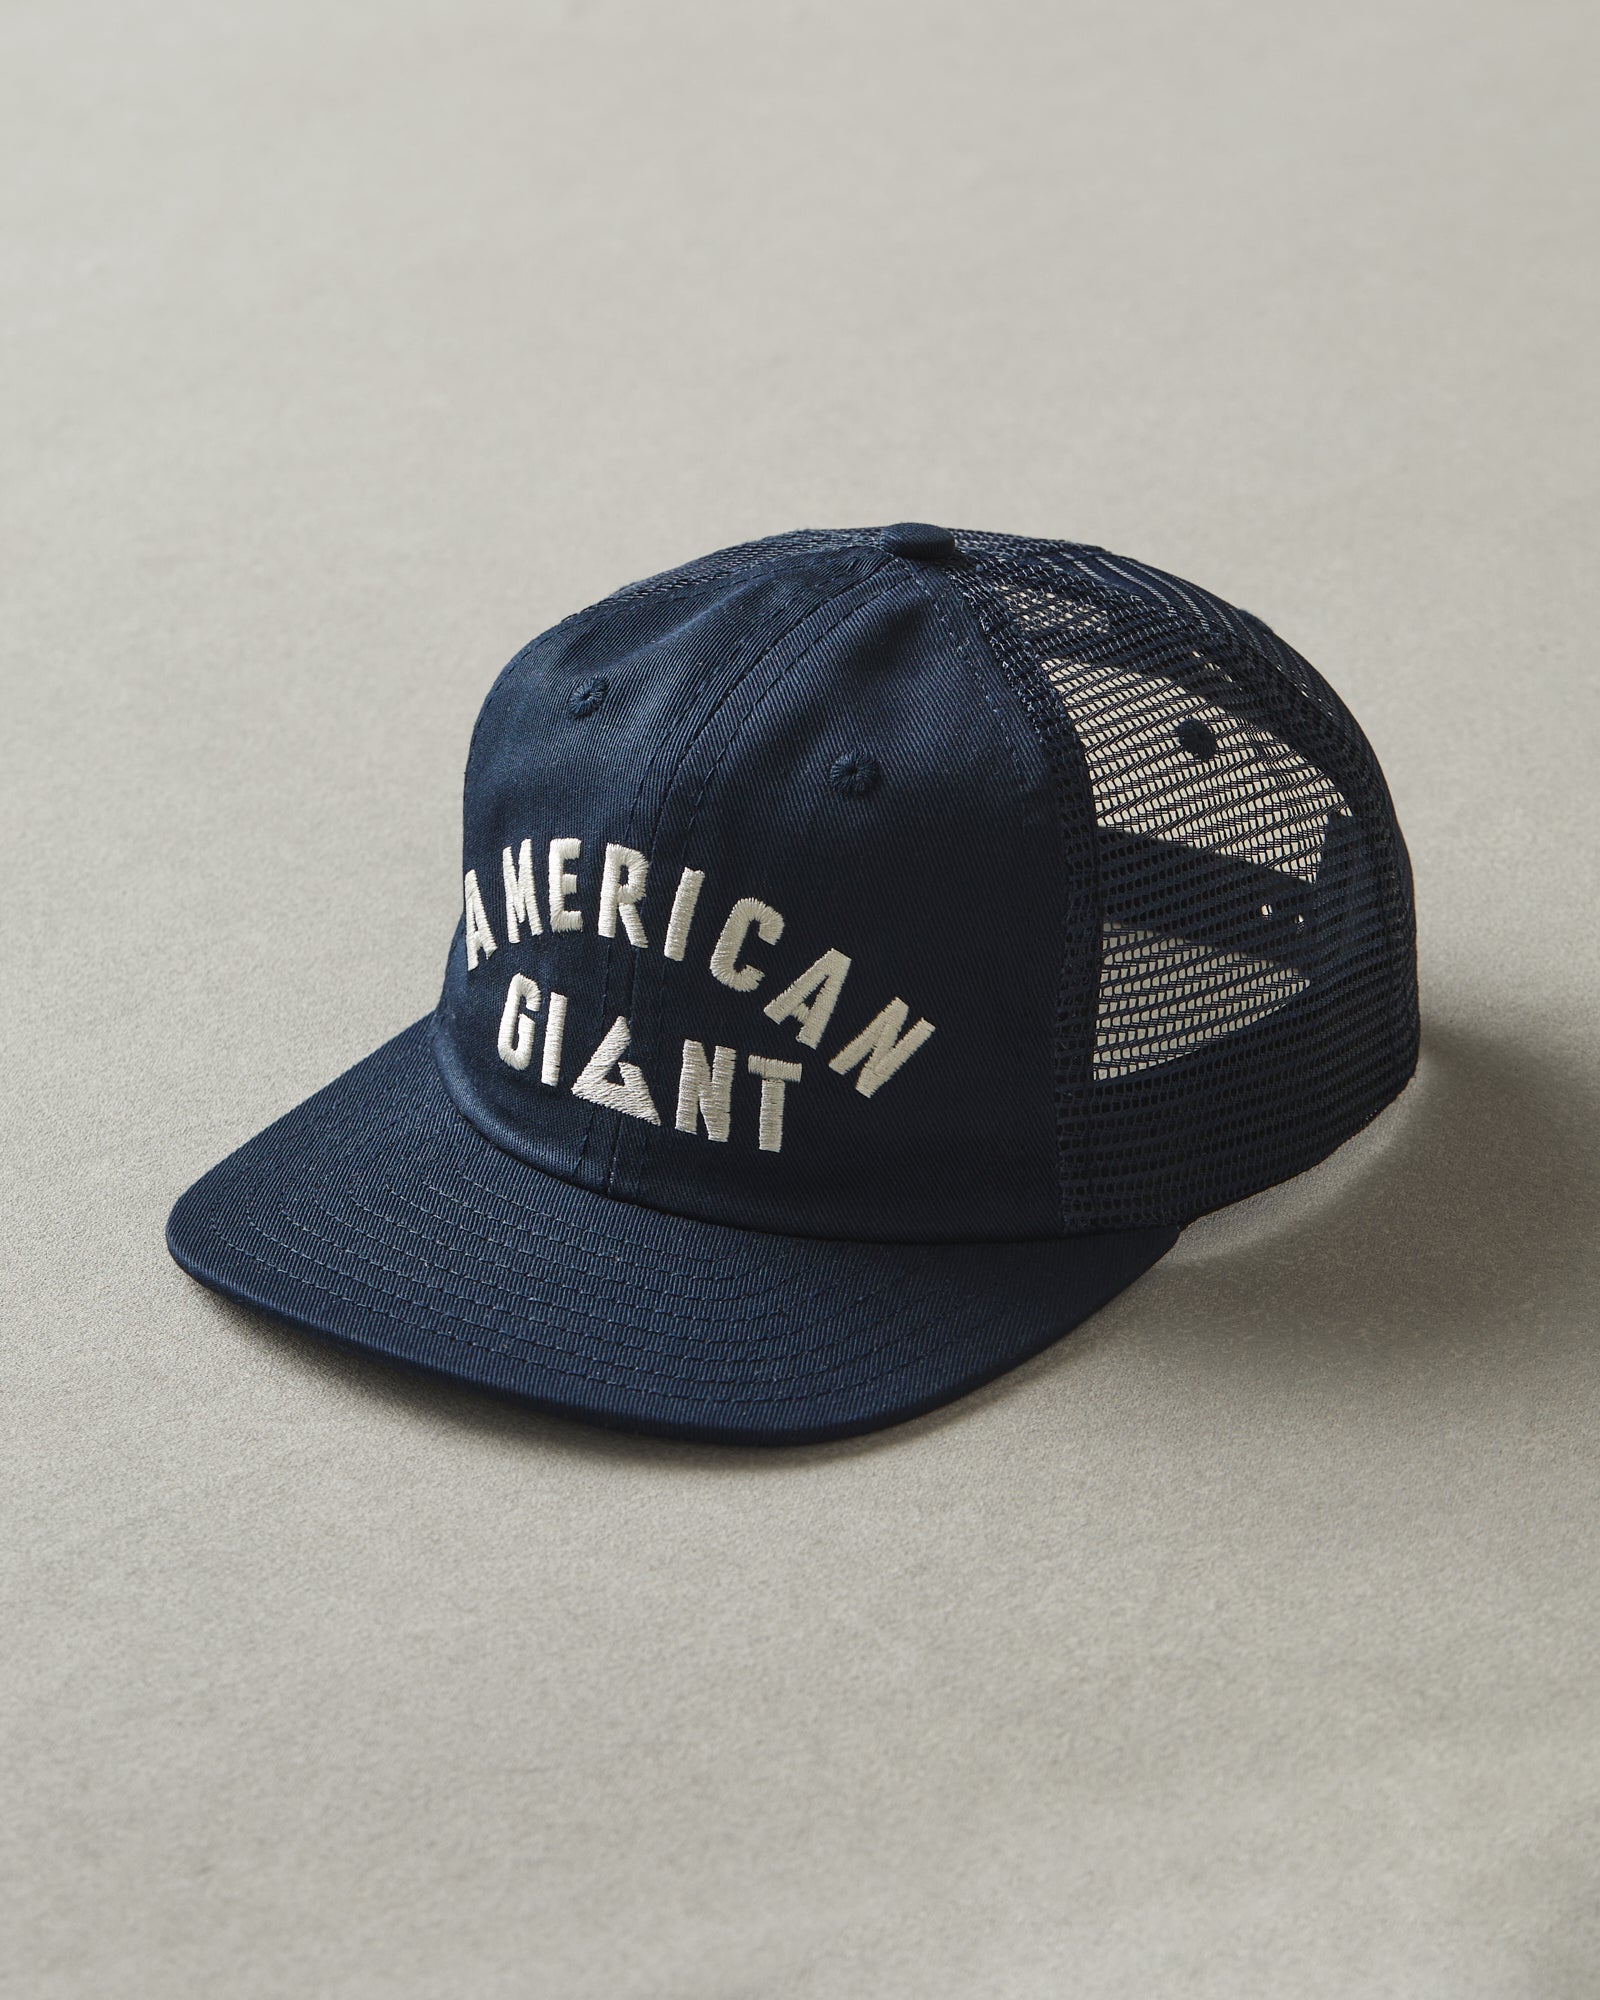 Ag Trucker Hat - Navy by American Giant - Made in The USA